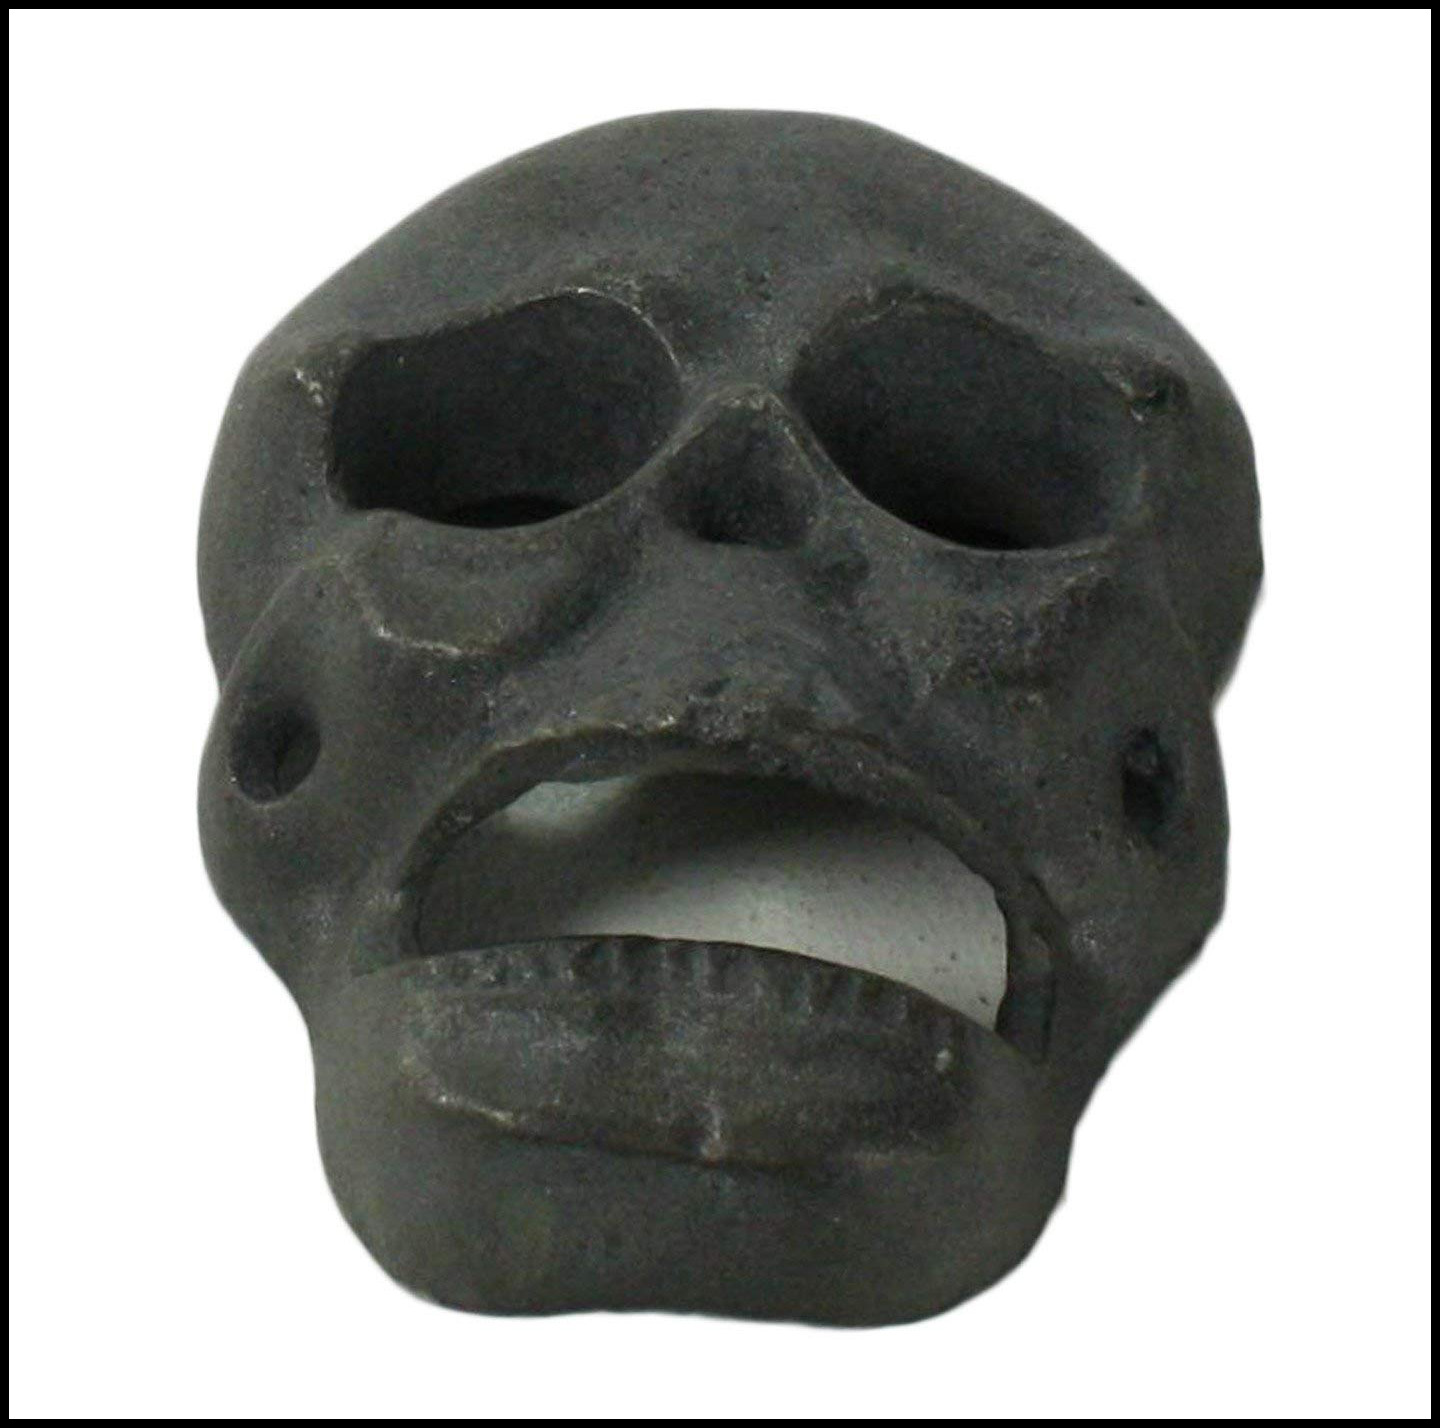 20 Macabre, Twisted, Unusual, Dark, Victorian, & Gothic Stocking Stuffers and Gifts under $30 | Oddities and Curiosities | Homart Cast Iron Skull Bottle Opener | Christmas Shopping Guide | Holiday Gift Ideas | www.MeandAnnabelLee.com